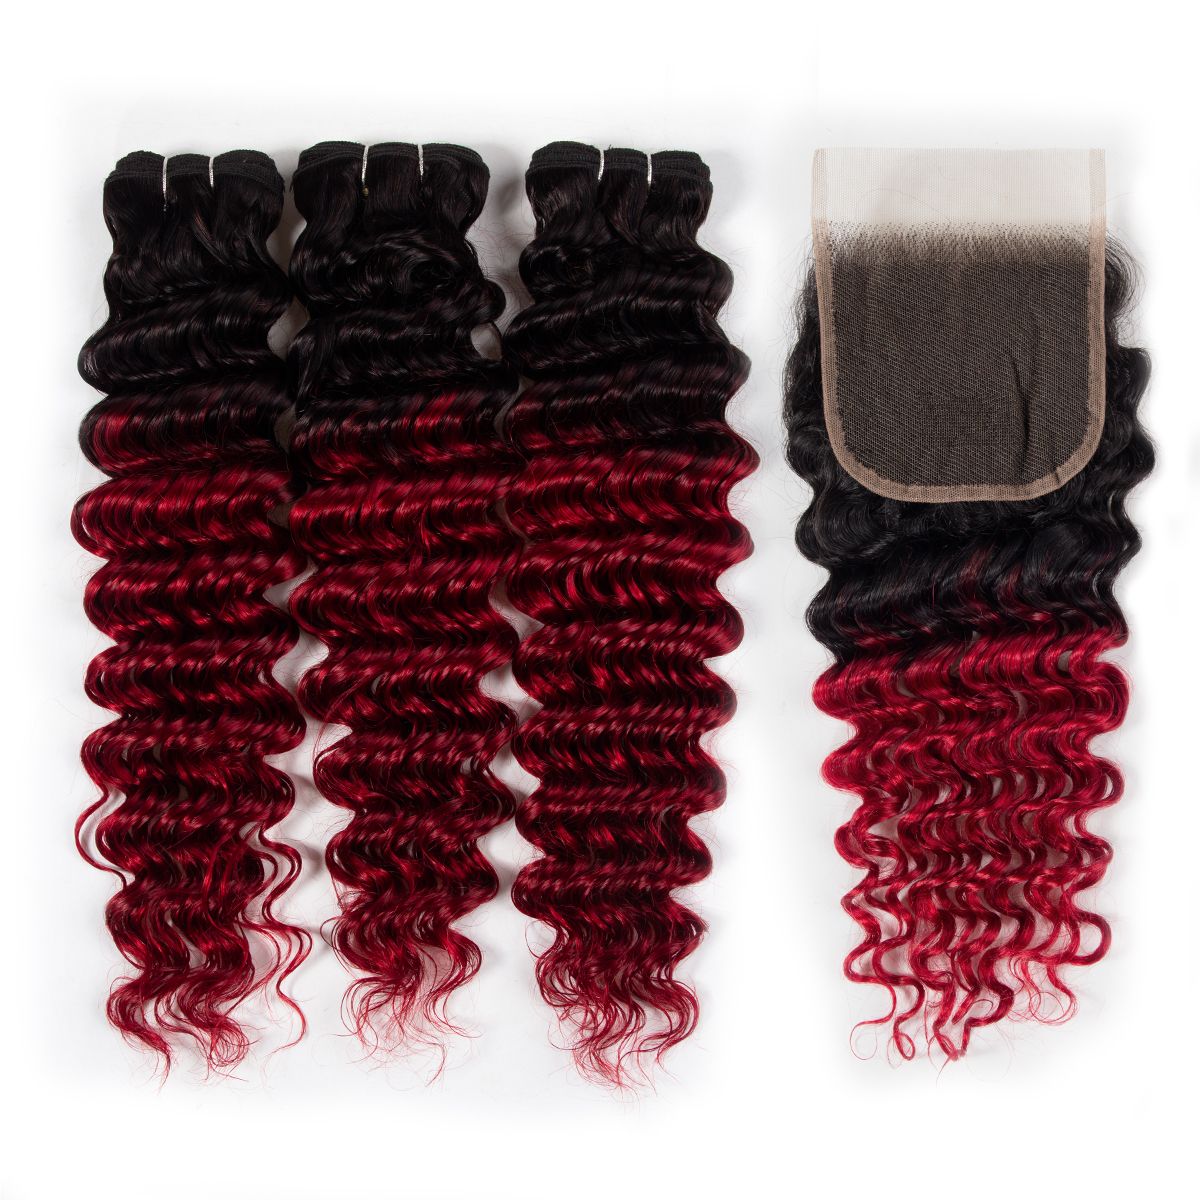 Ombre Hair T1B/Red Brazilian Deep Wave Bundles with Closure